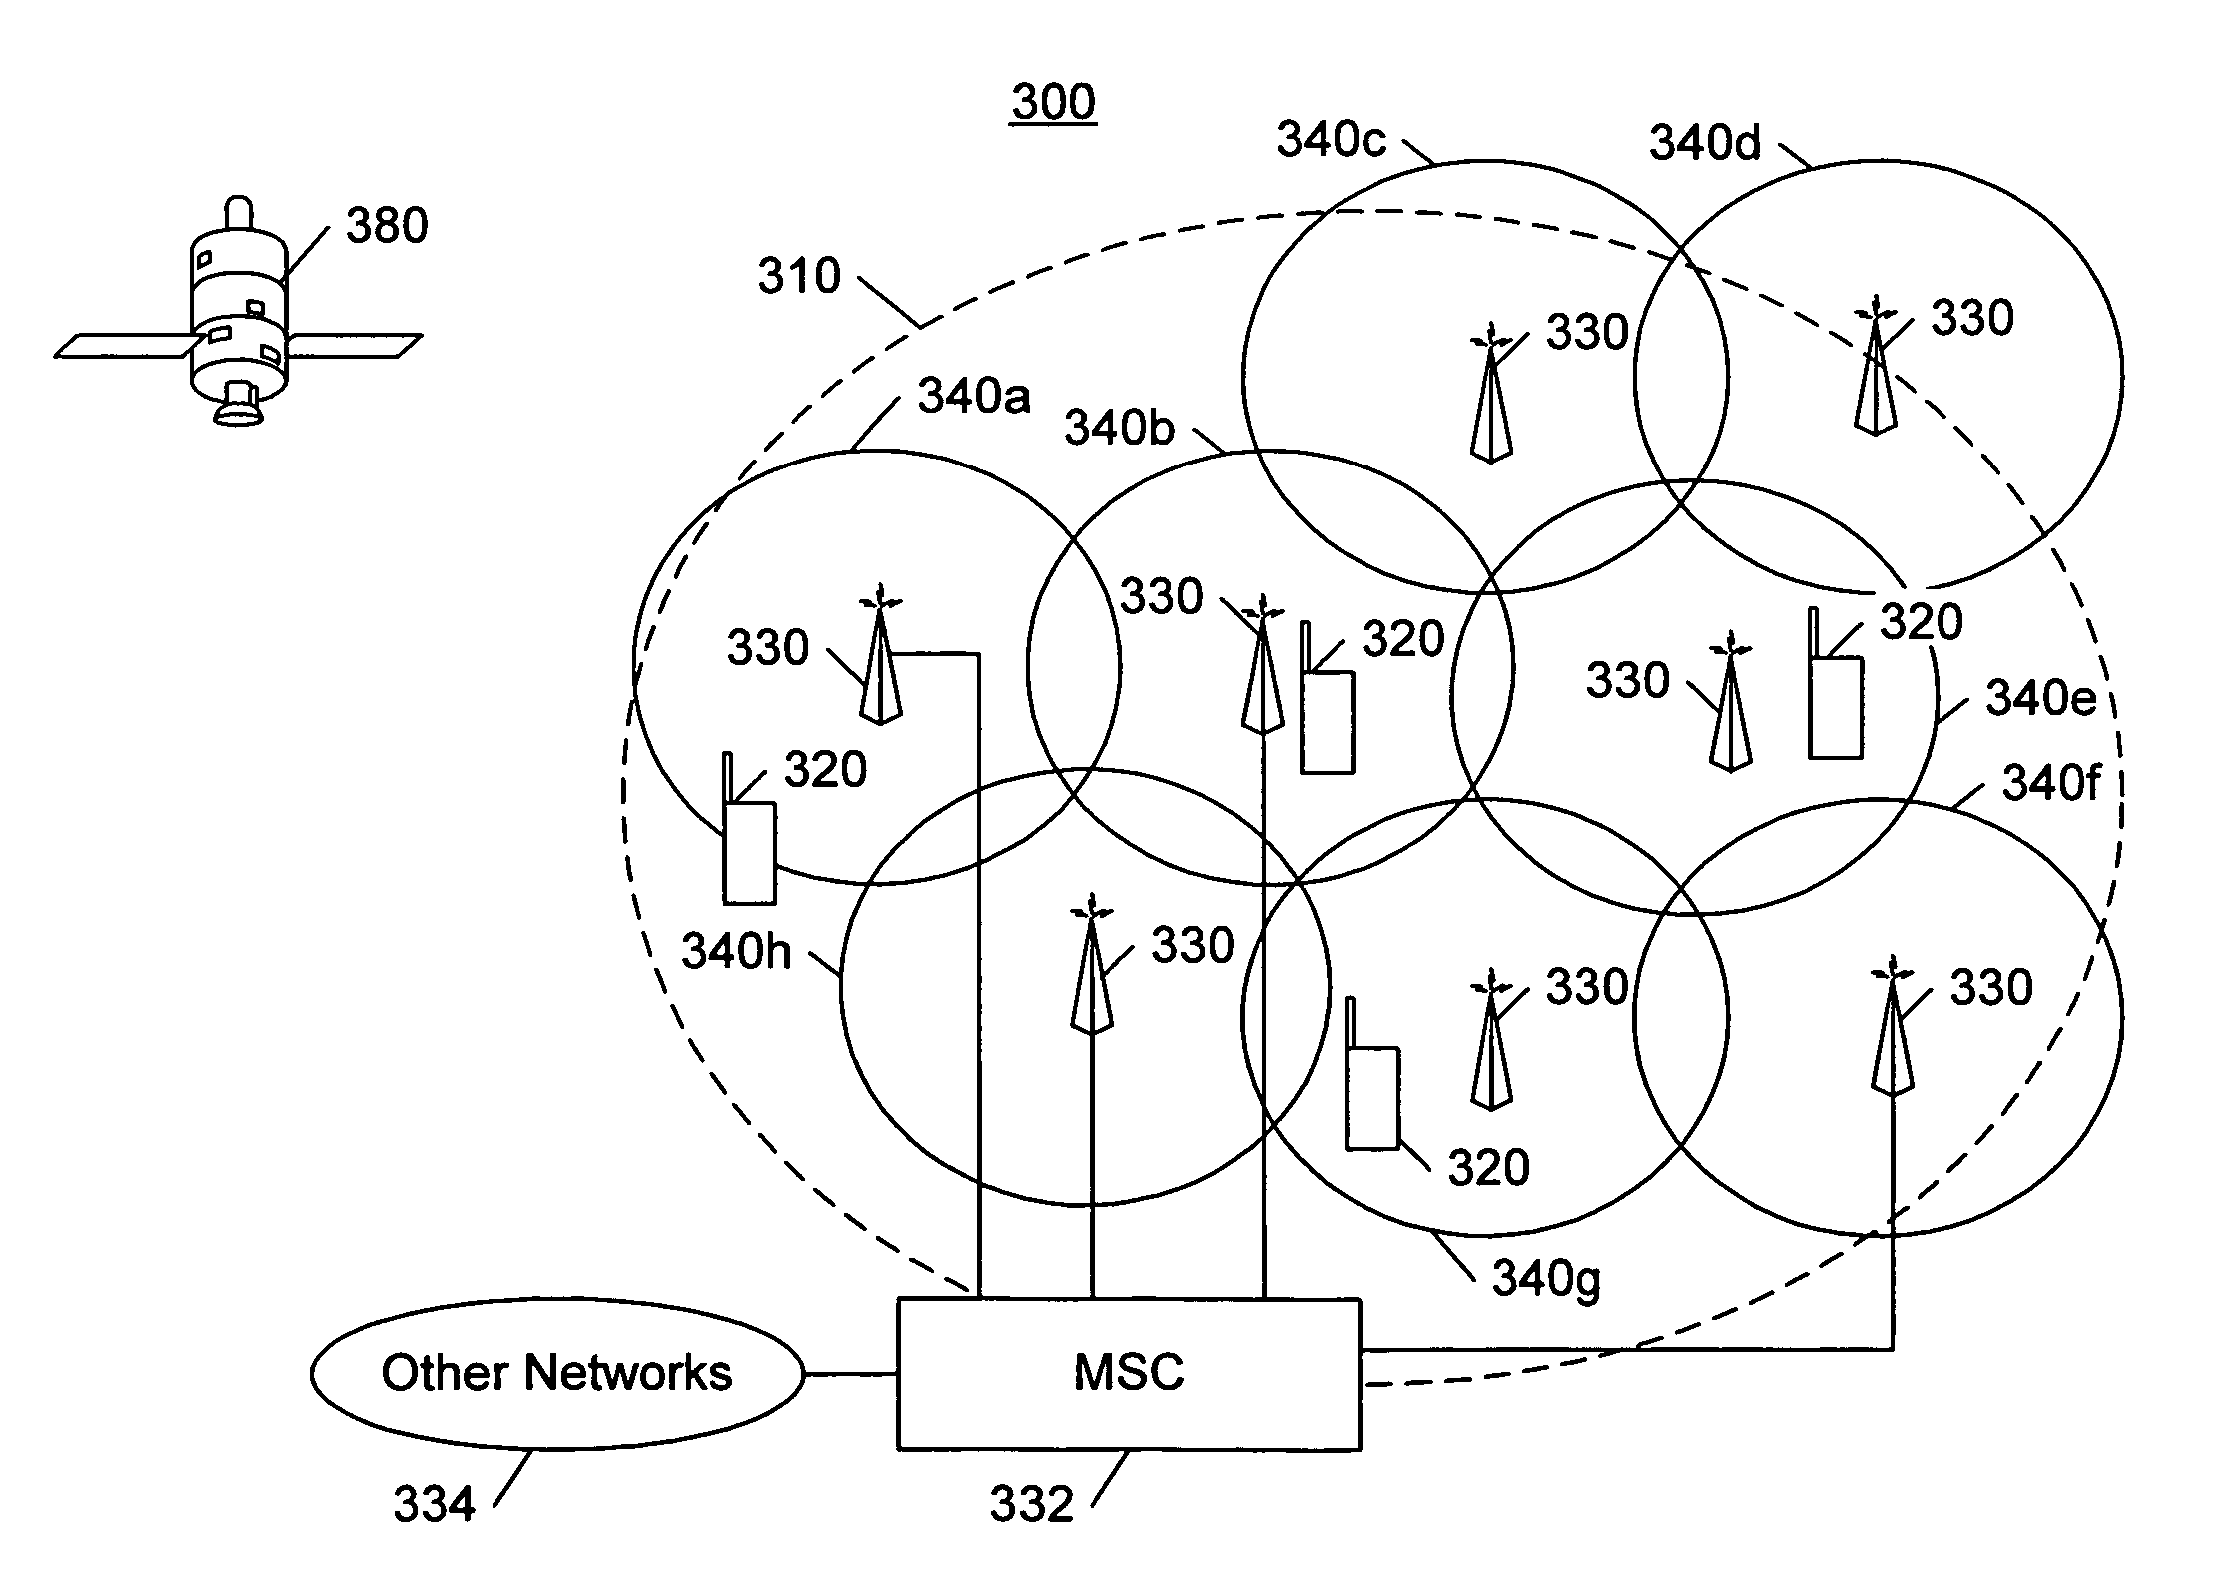 Prediction of uplink interference potential generated by an ancillary terrestrial network and/or radioterminals